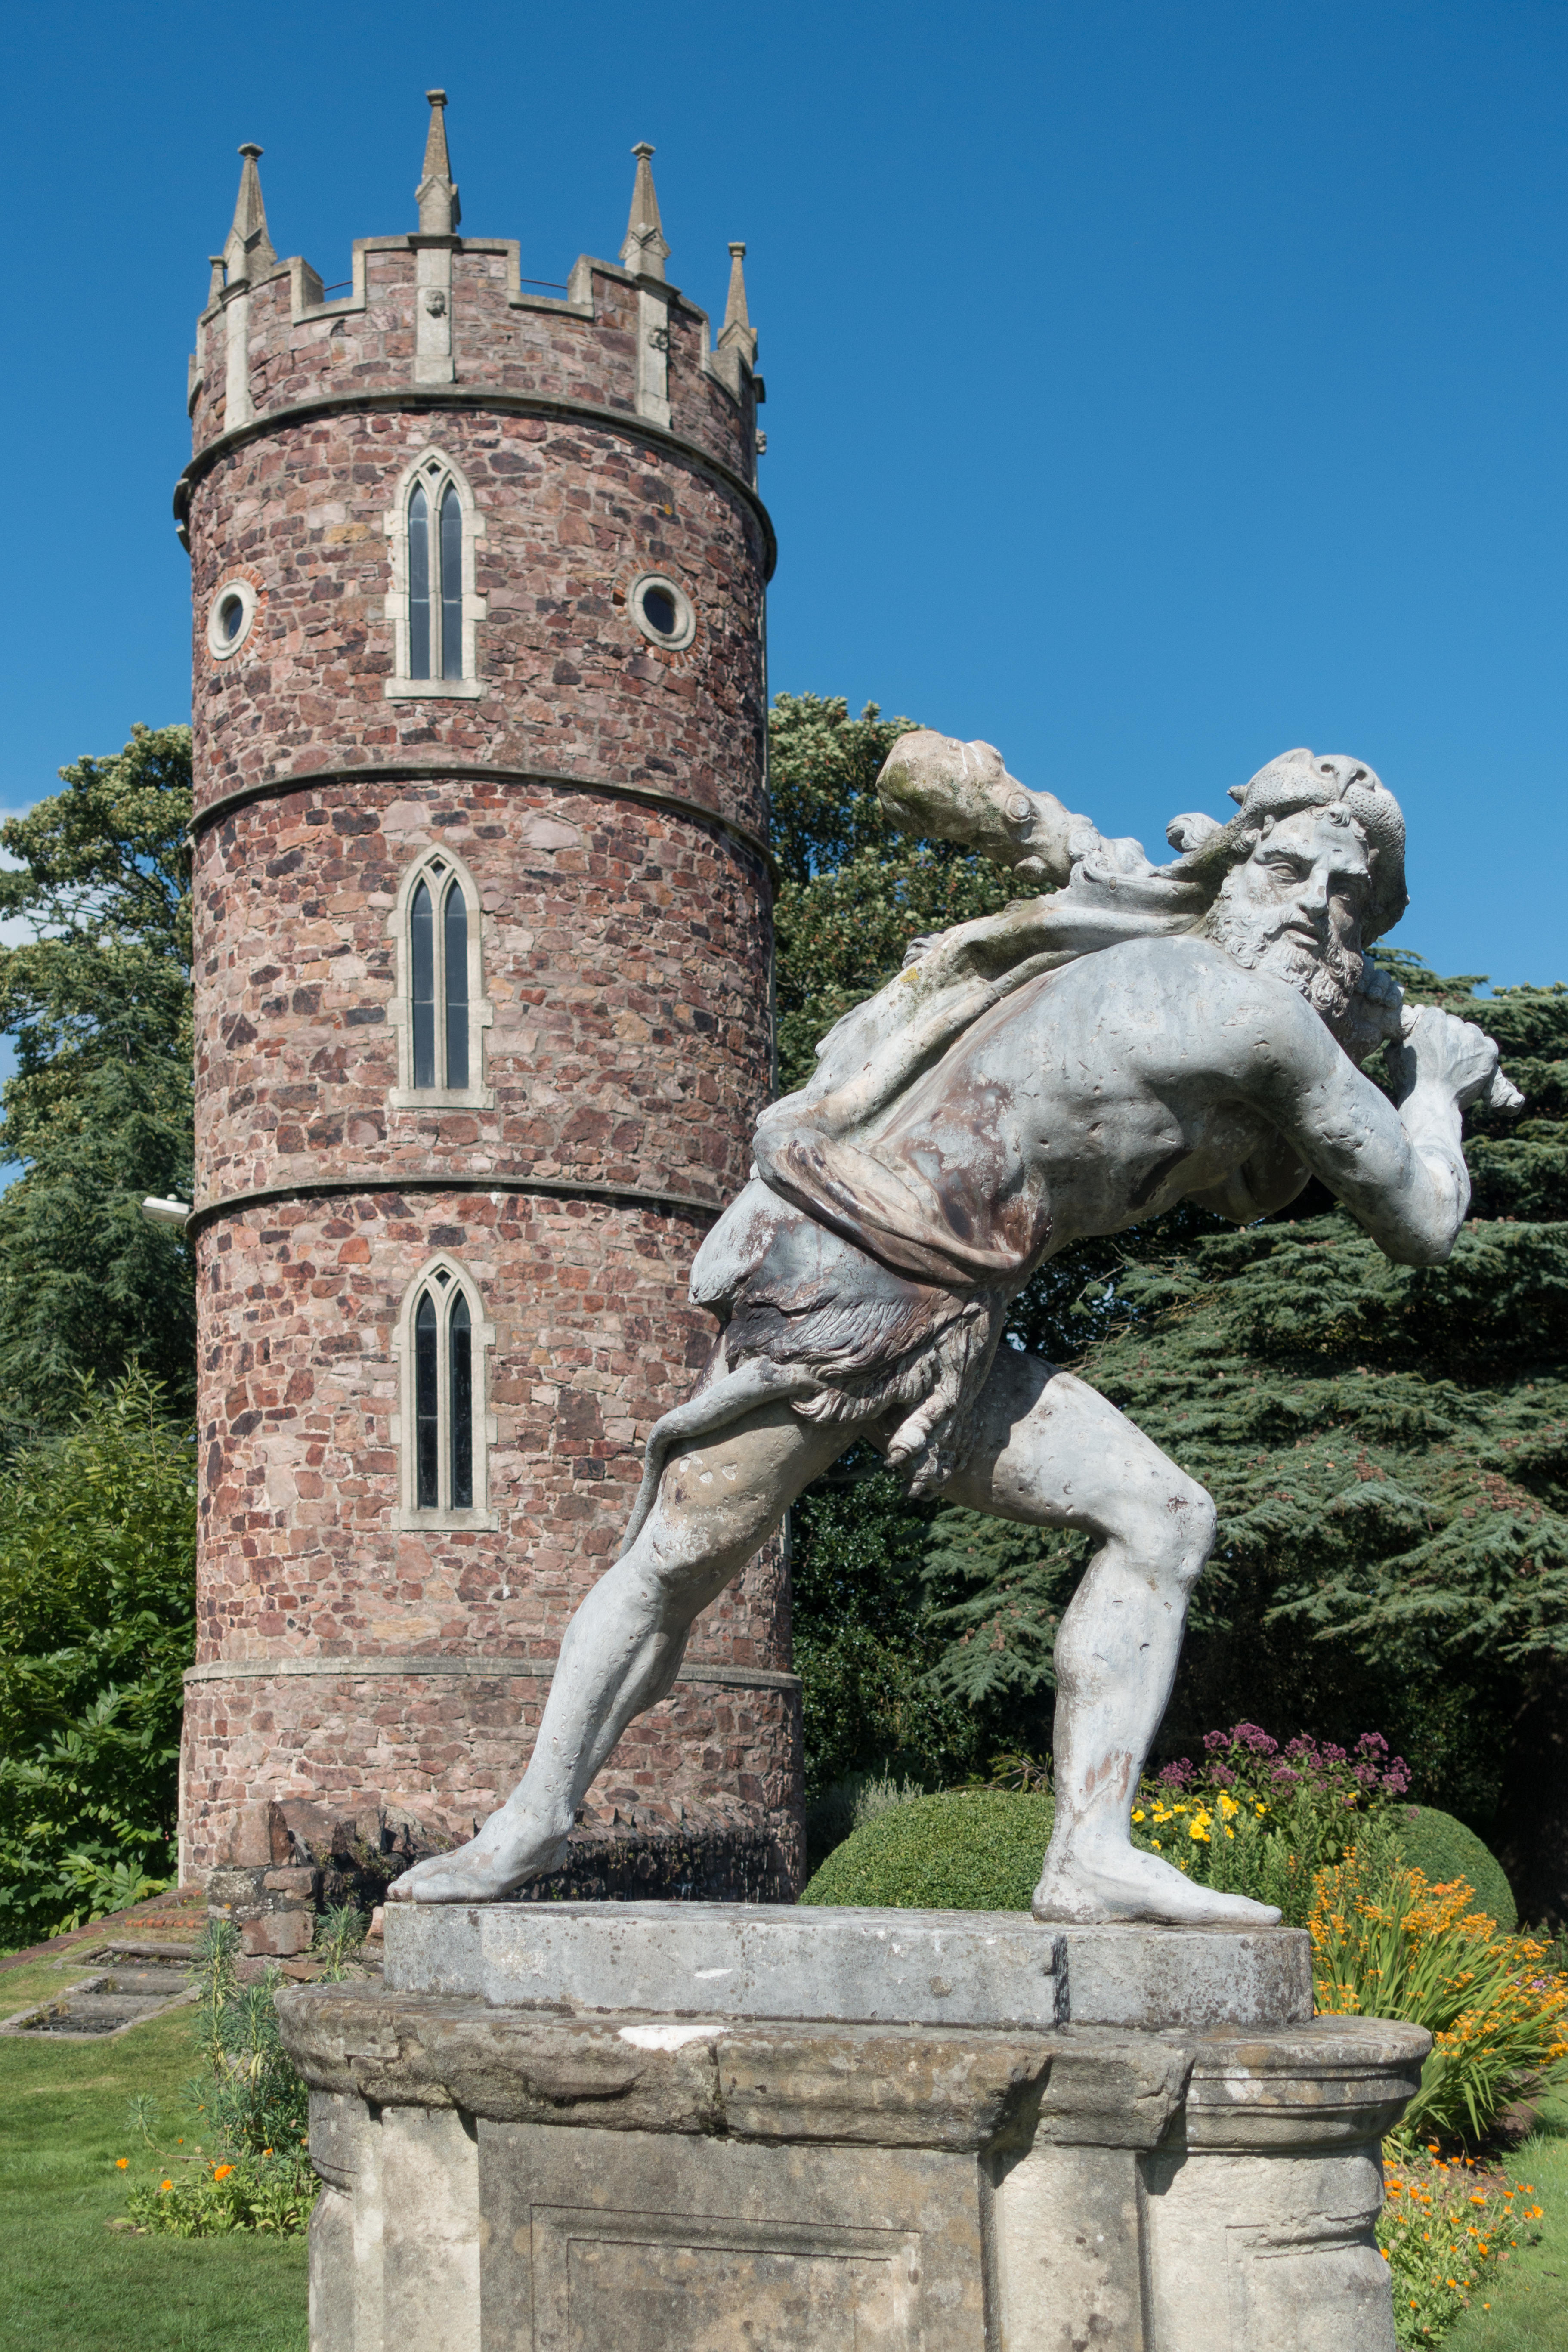 The gardens are also home to a Gothic tower and a statue of Hercules